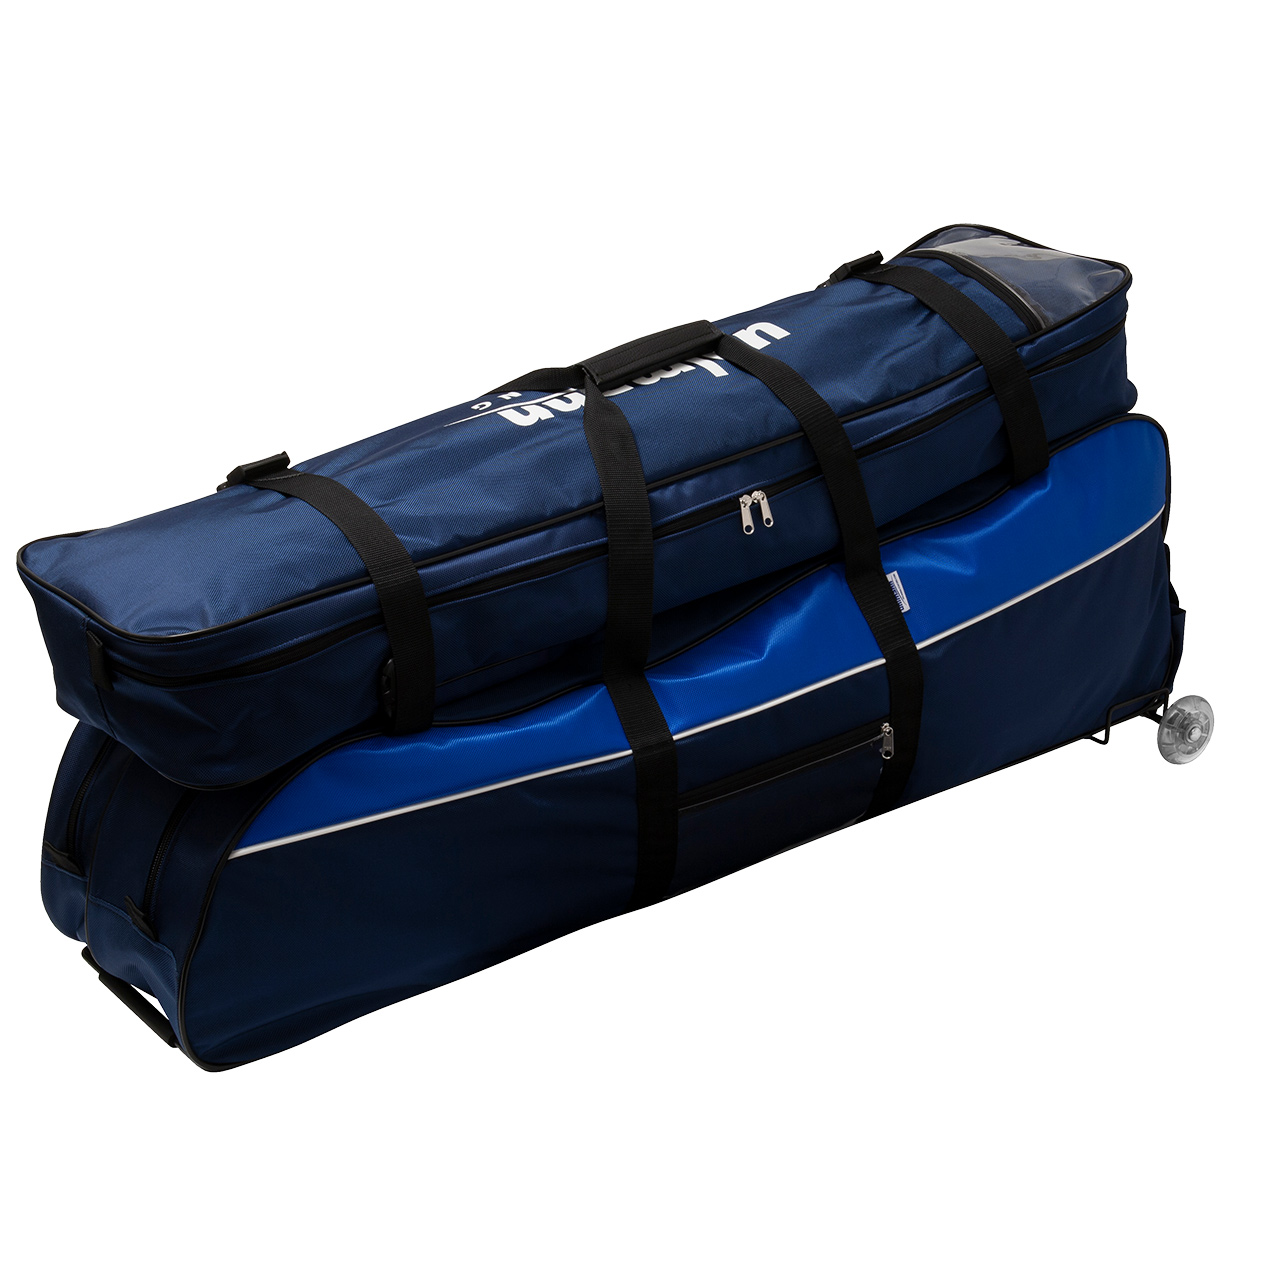 rollbag "Vario" PLUS, including high-top bag